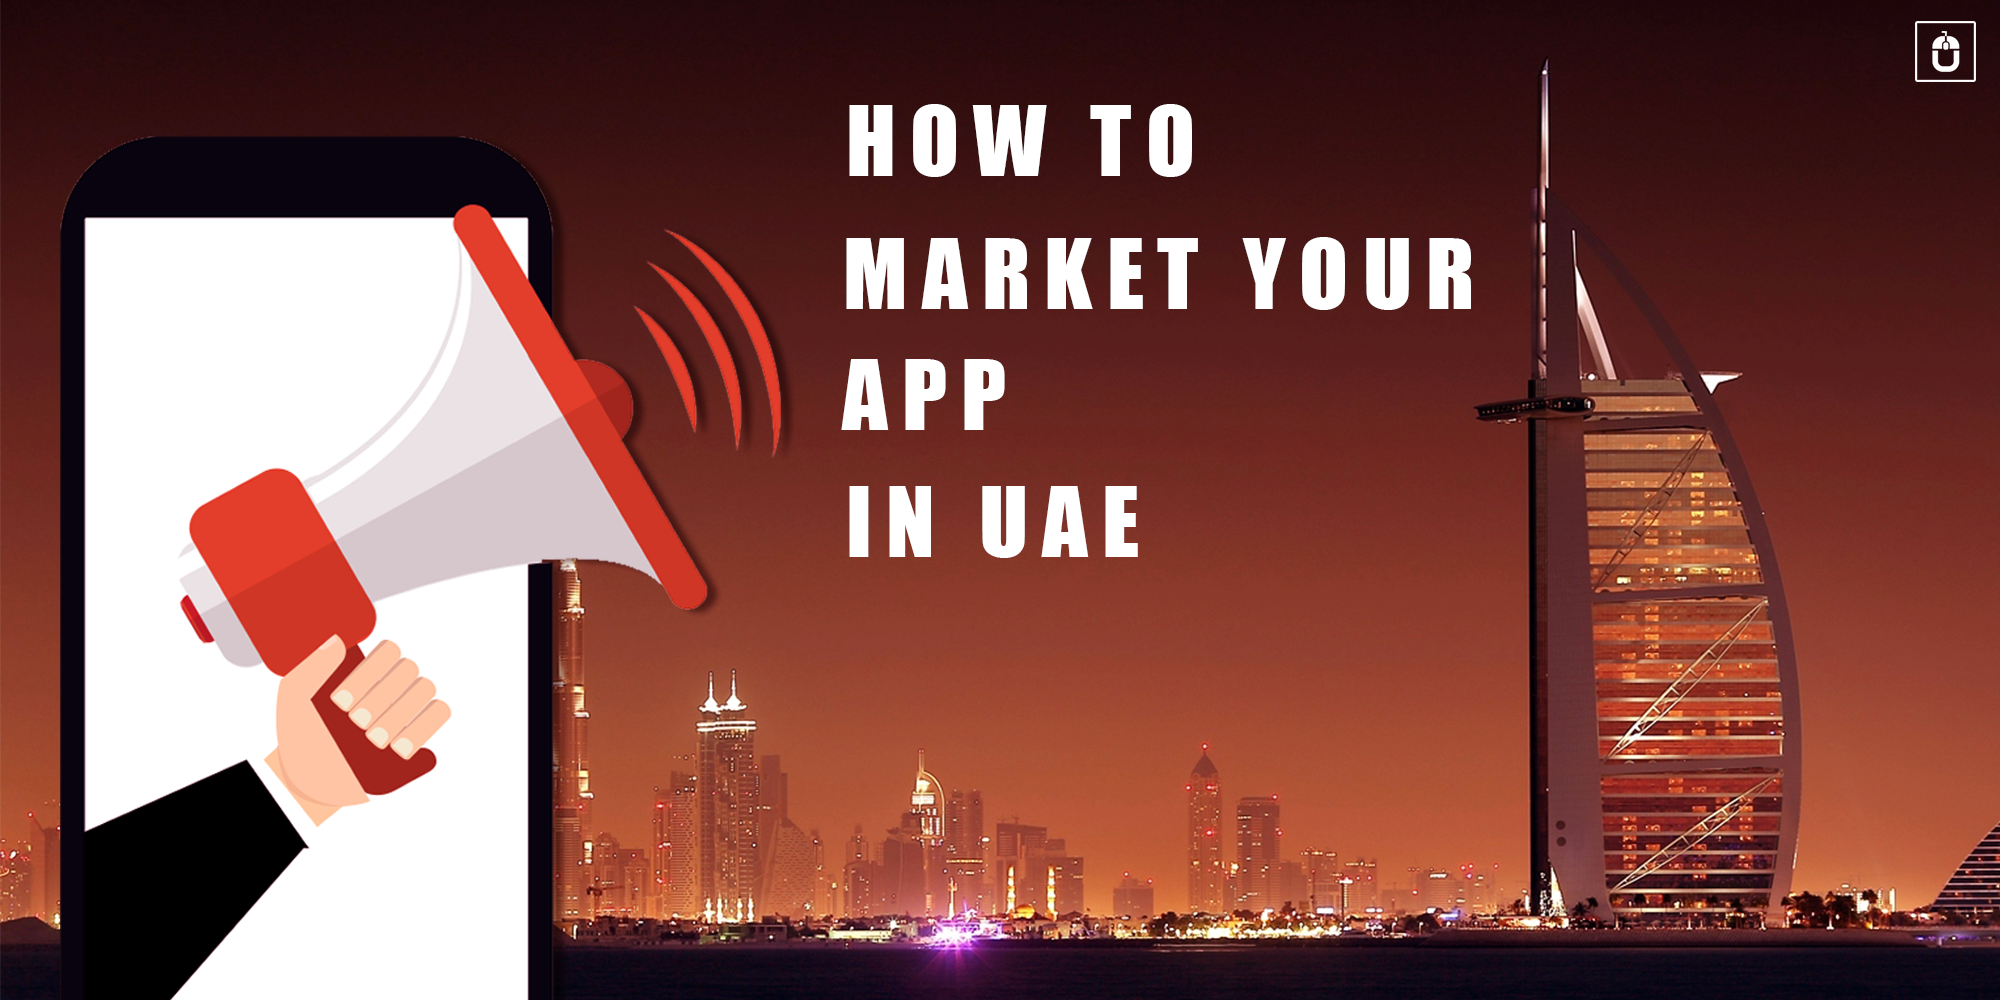 HOW TO MARKET YOUR APP IN UAE